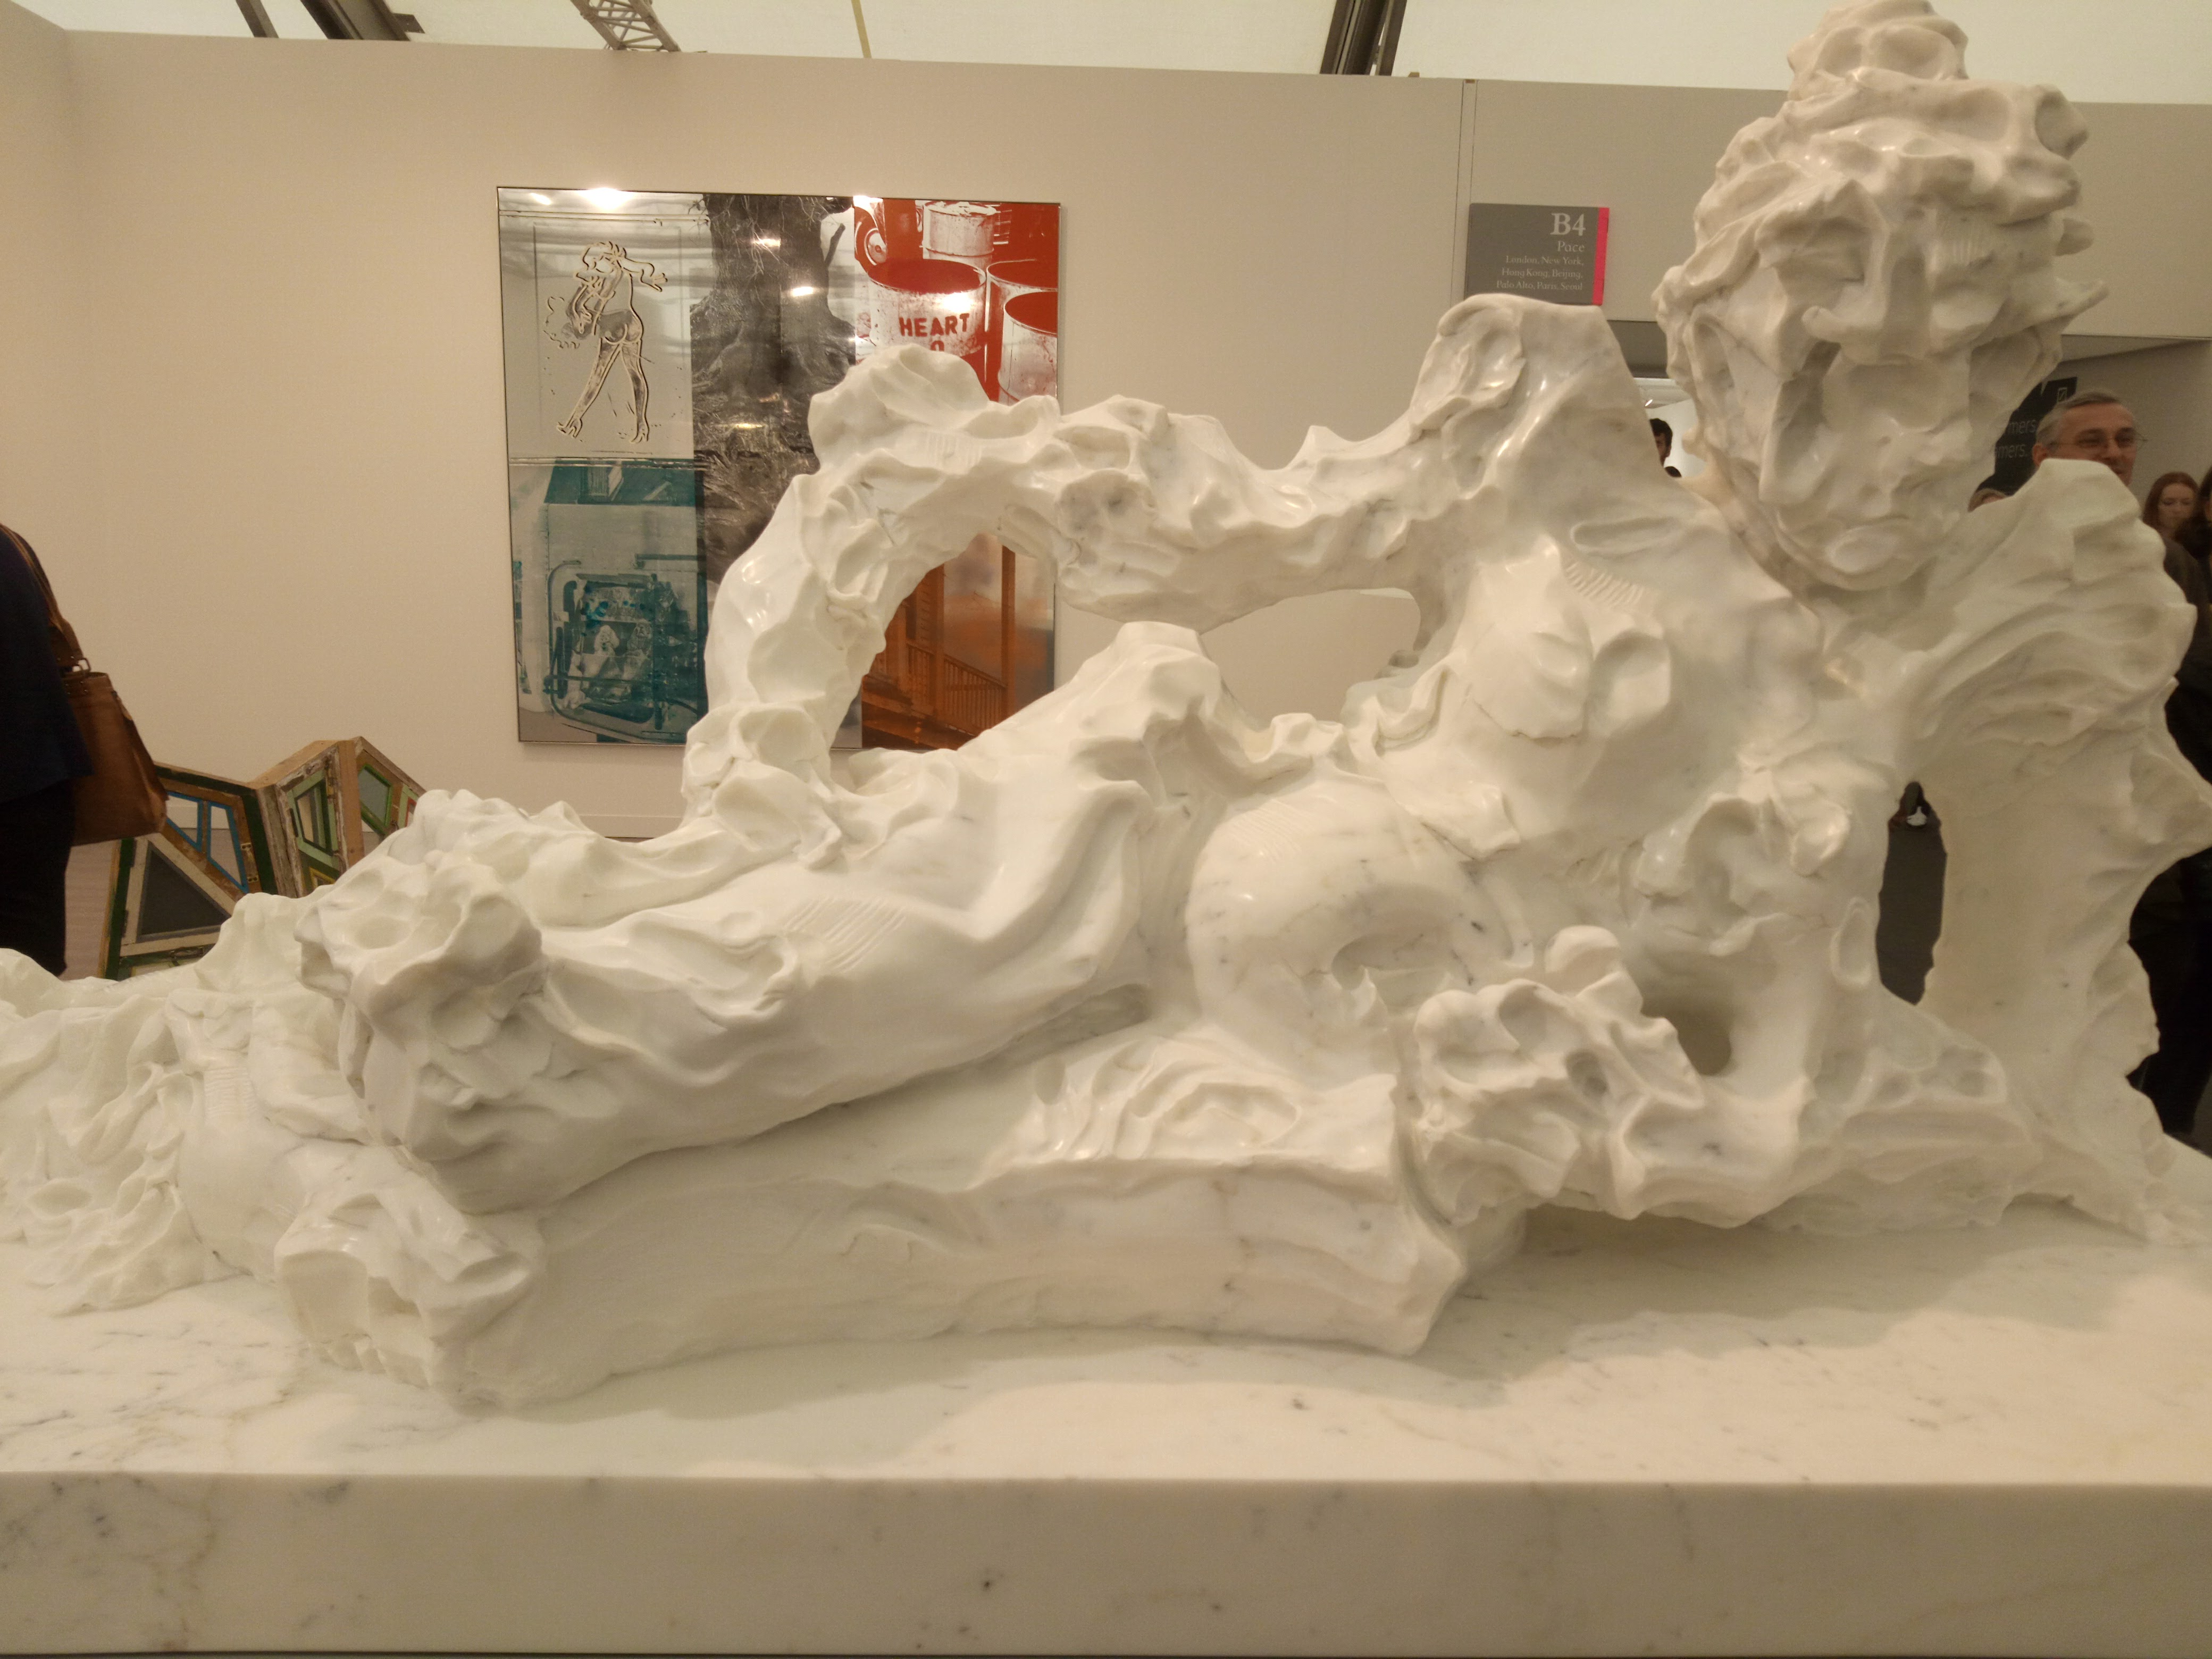 Kevin Francis Grey, The Reclining Nude, 2016, Pace gallery, Frieze London, Regent's Park